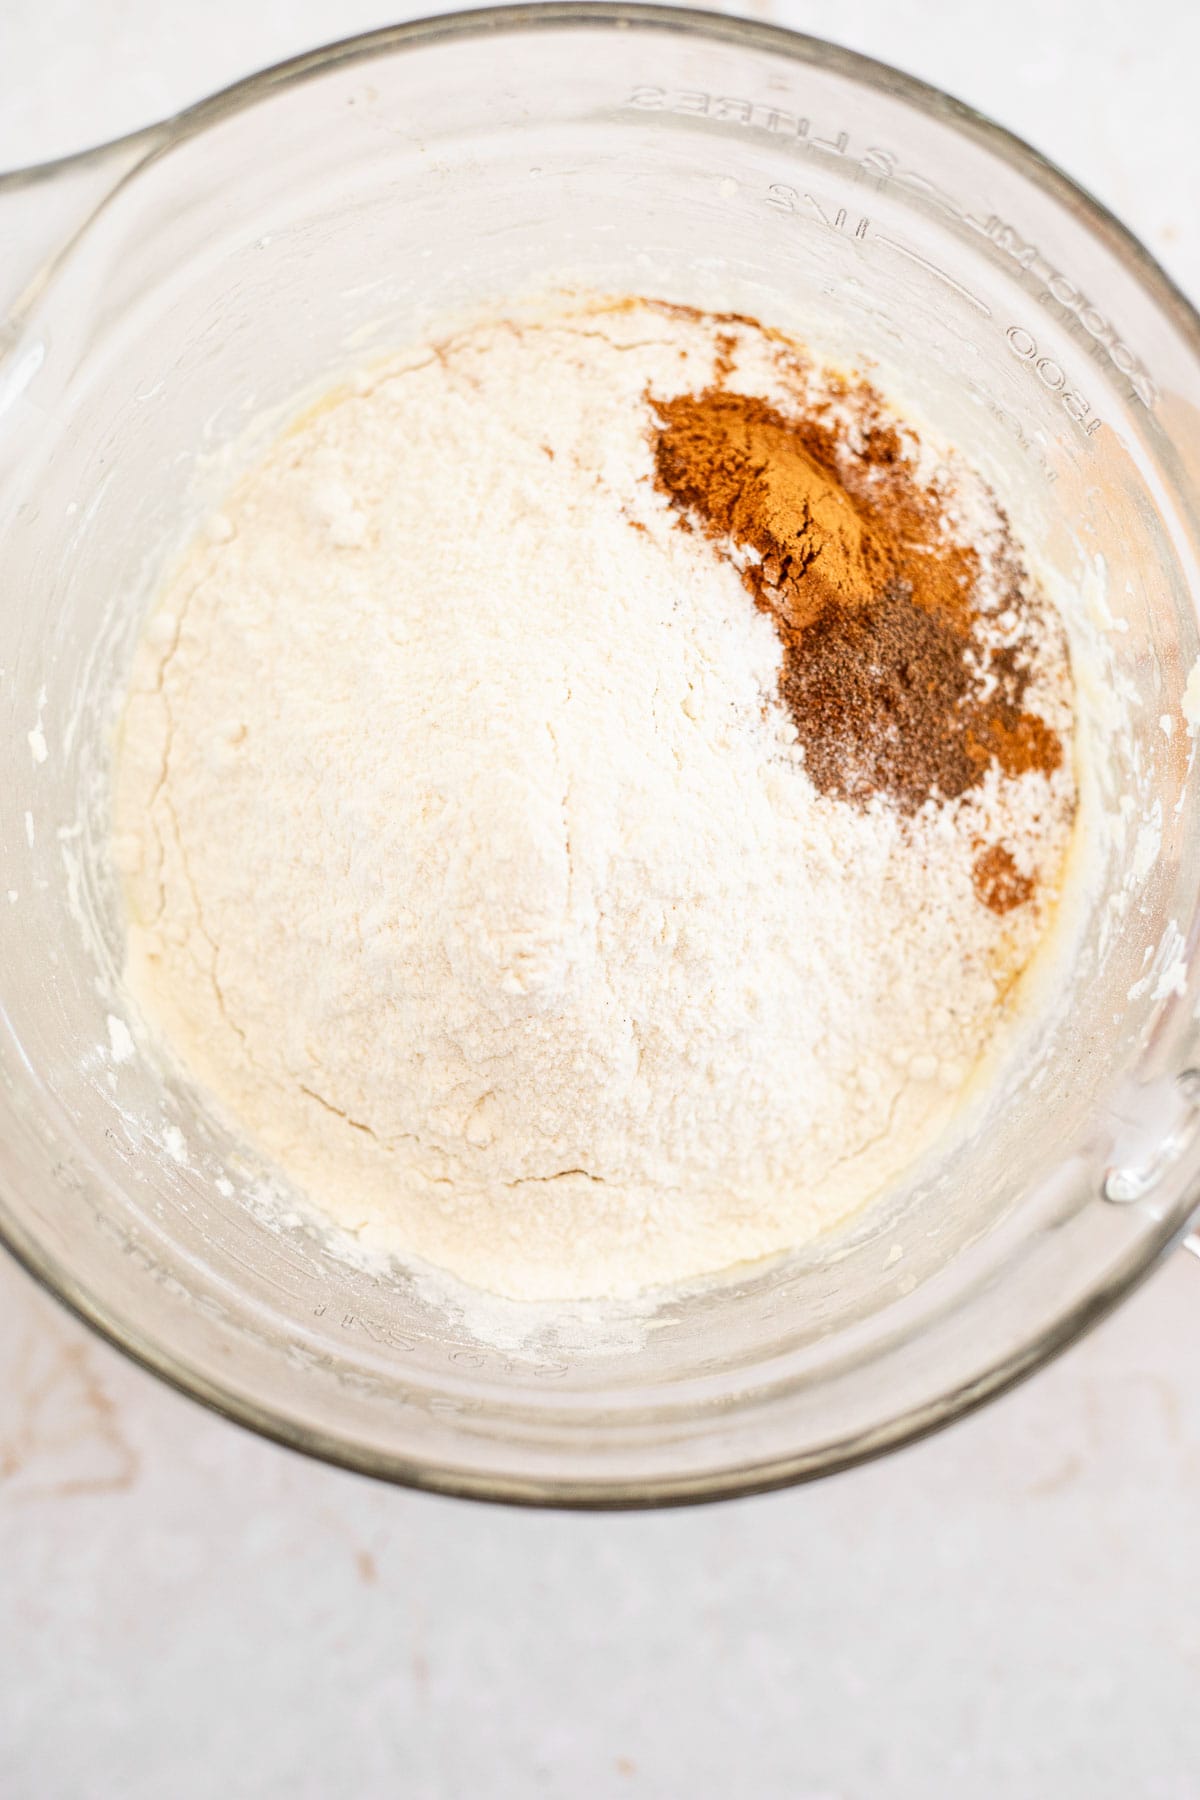 flour and cinnamon on top of cake batter in a glass bowl.